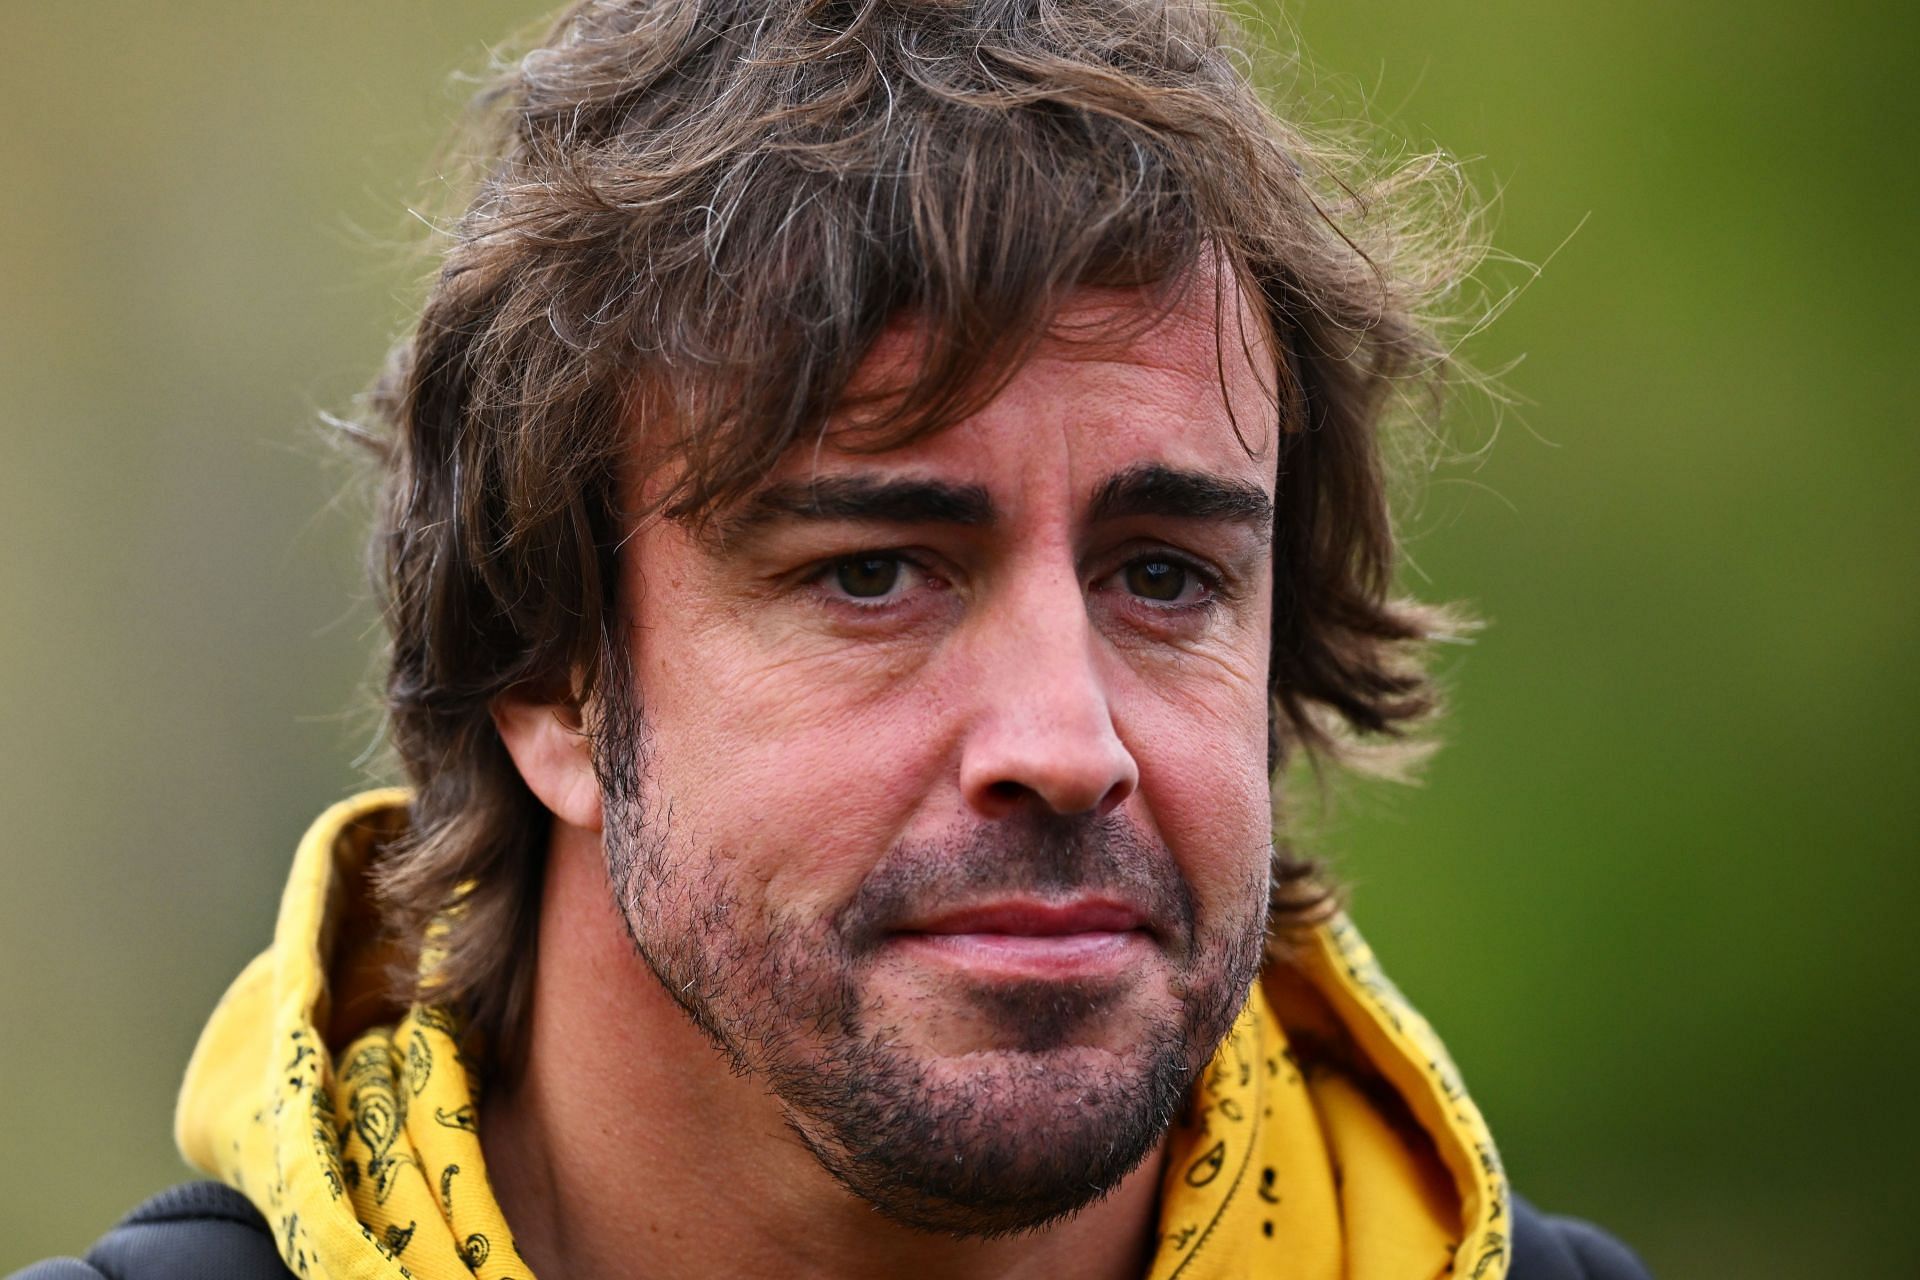 Fernando Alonso of Spain and Alpine F1 walks in the Paddock during previews ahead of the F1 Grand Prix of Emilia Romagna at Autodromo Enzo e Dino Ferrari on April 21, 2022 in Imola, Italy. (Photo by Clive Mason/Getty Images)